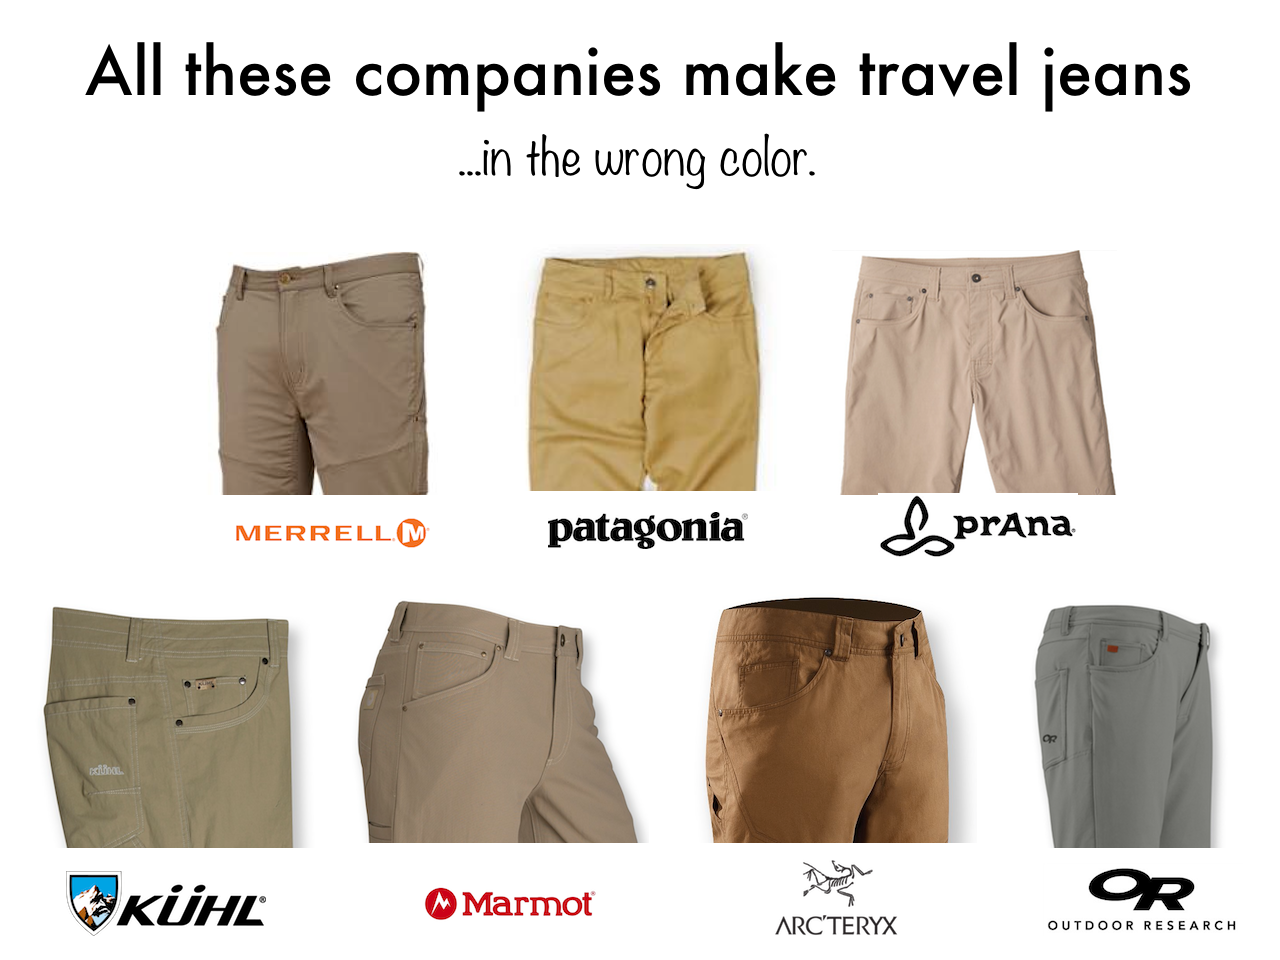 Travel jeans, my imaginary best friend – Snarky Nomad